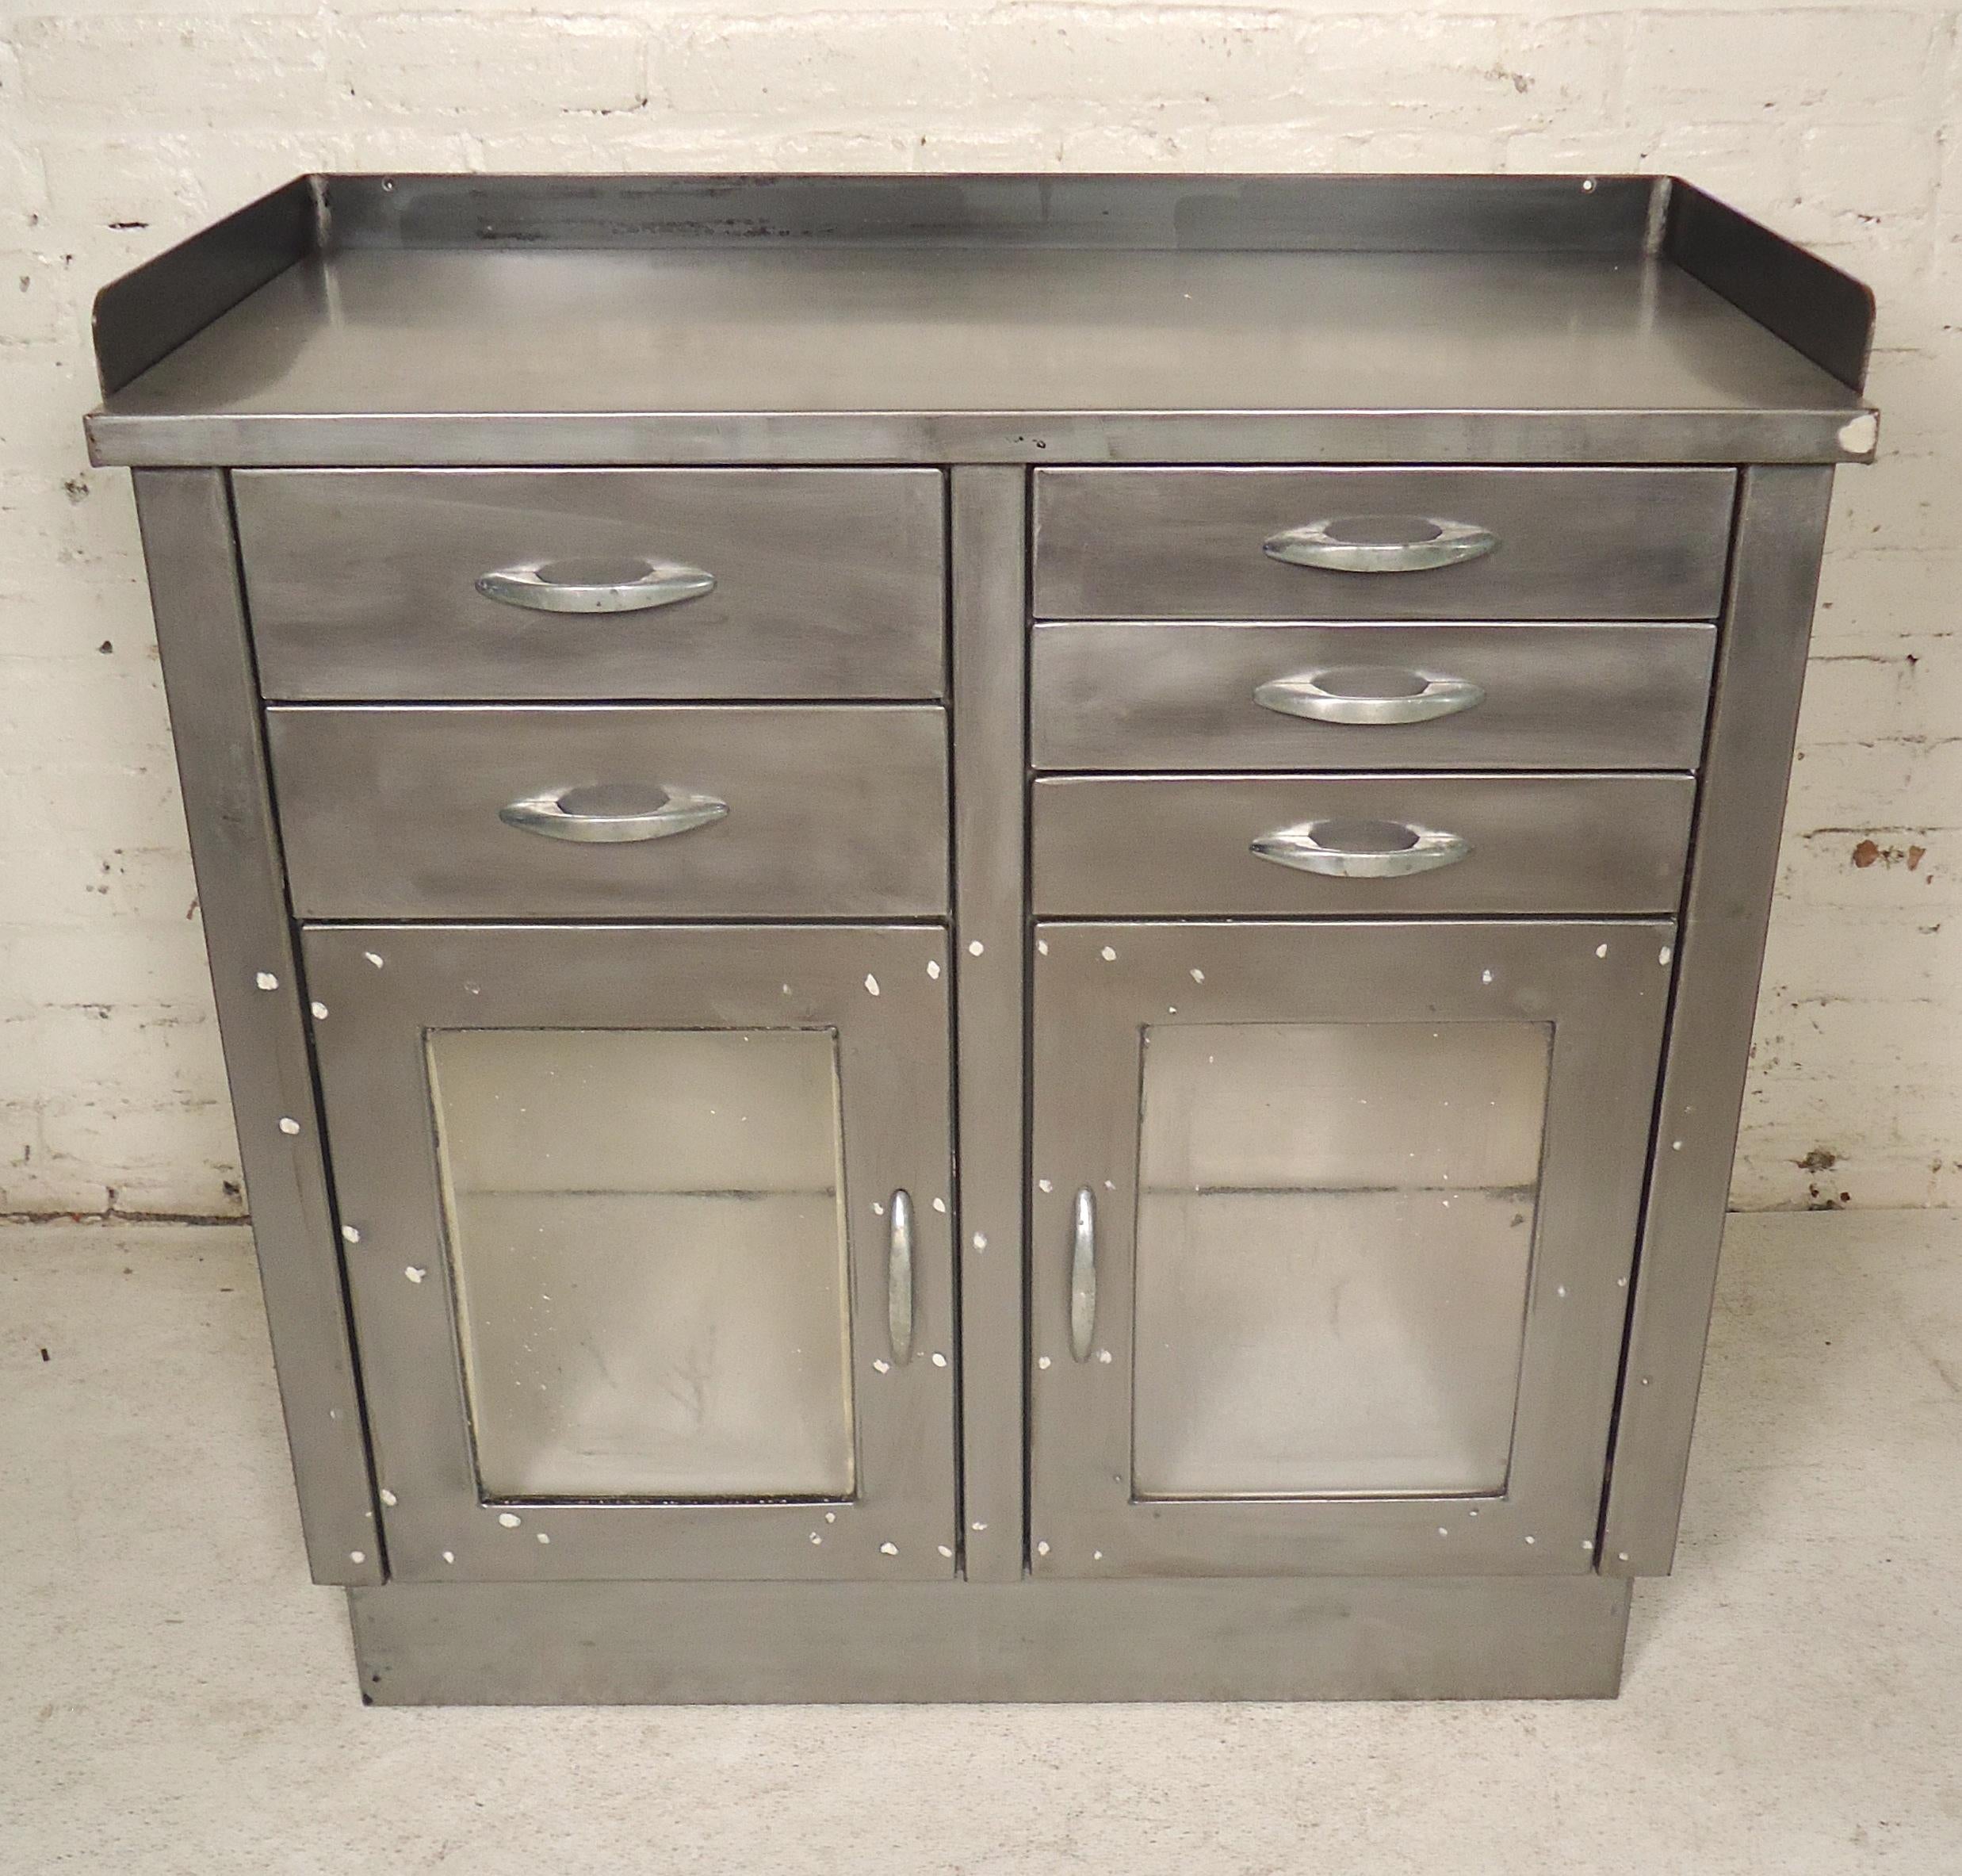 Medical cabinet refinished in a bare metal style finish. Drawers and cabinet storage with flat top, great for modern homes.

(Please confirm item location - NY or NJ - with dealer).
 